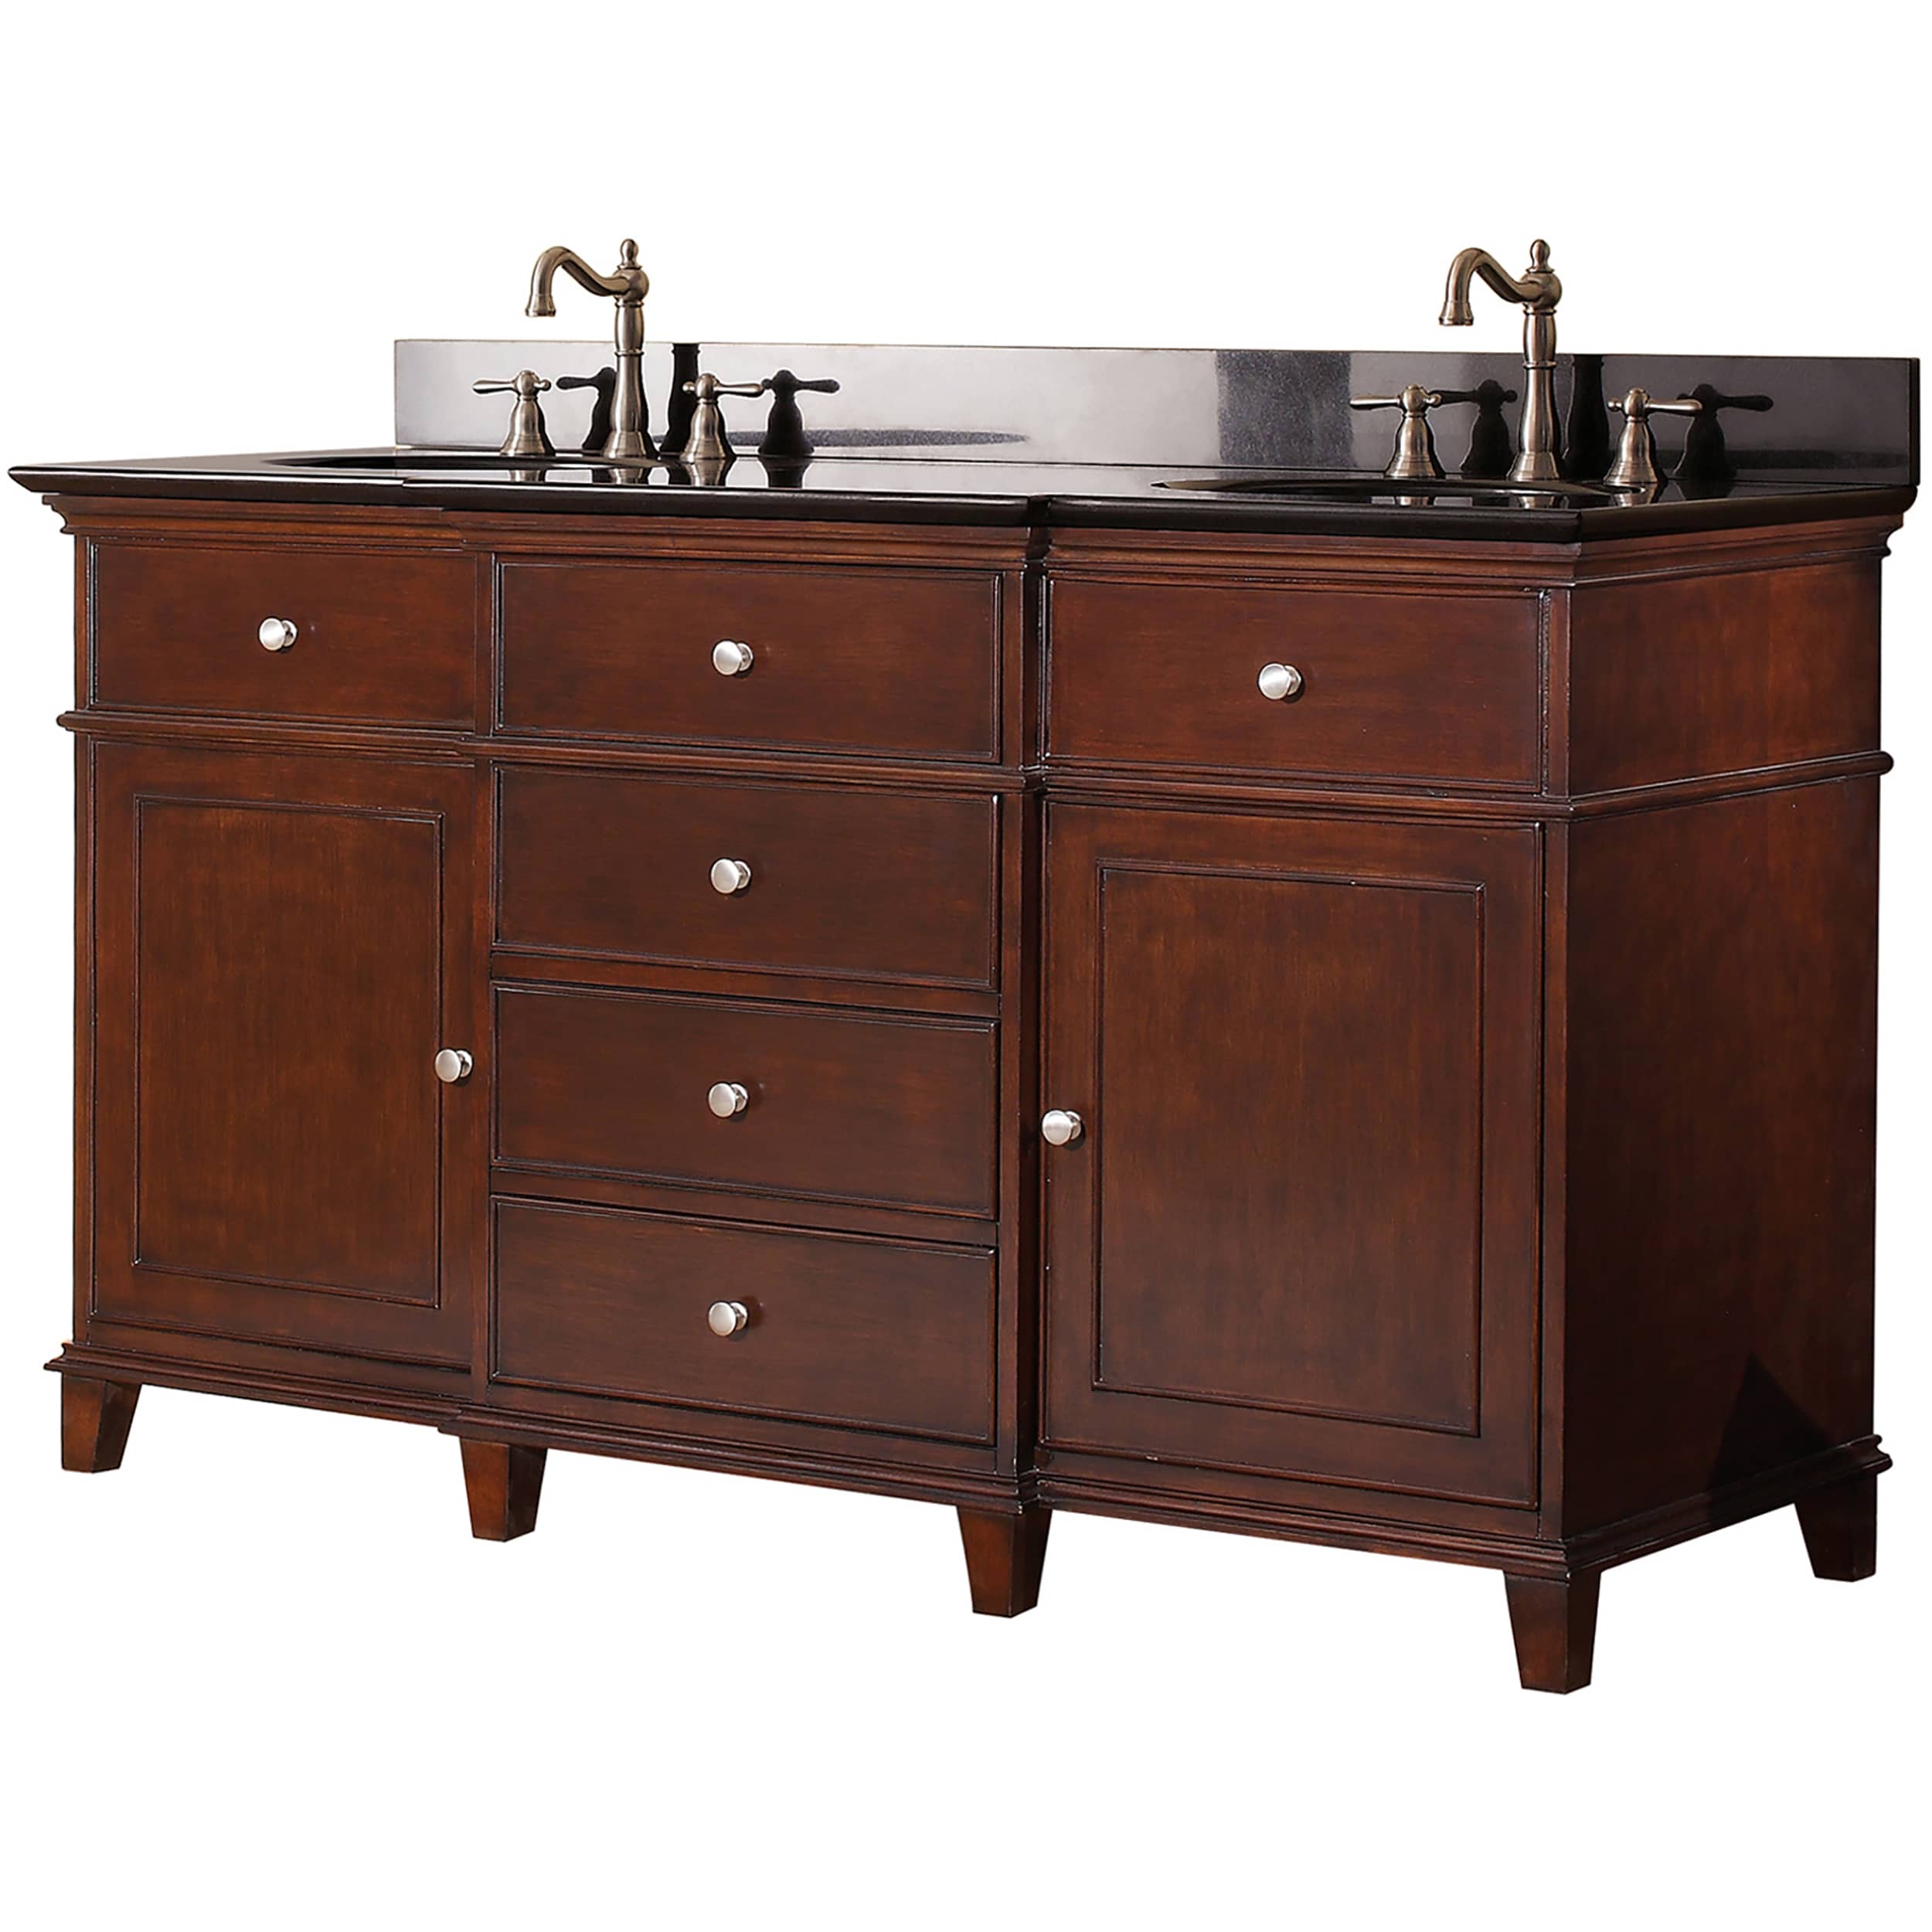 Avanity Windsor 60 Inch Double Vanity In Walnut Finish With Dual Sinks And Top